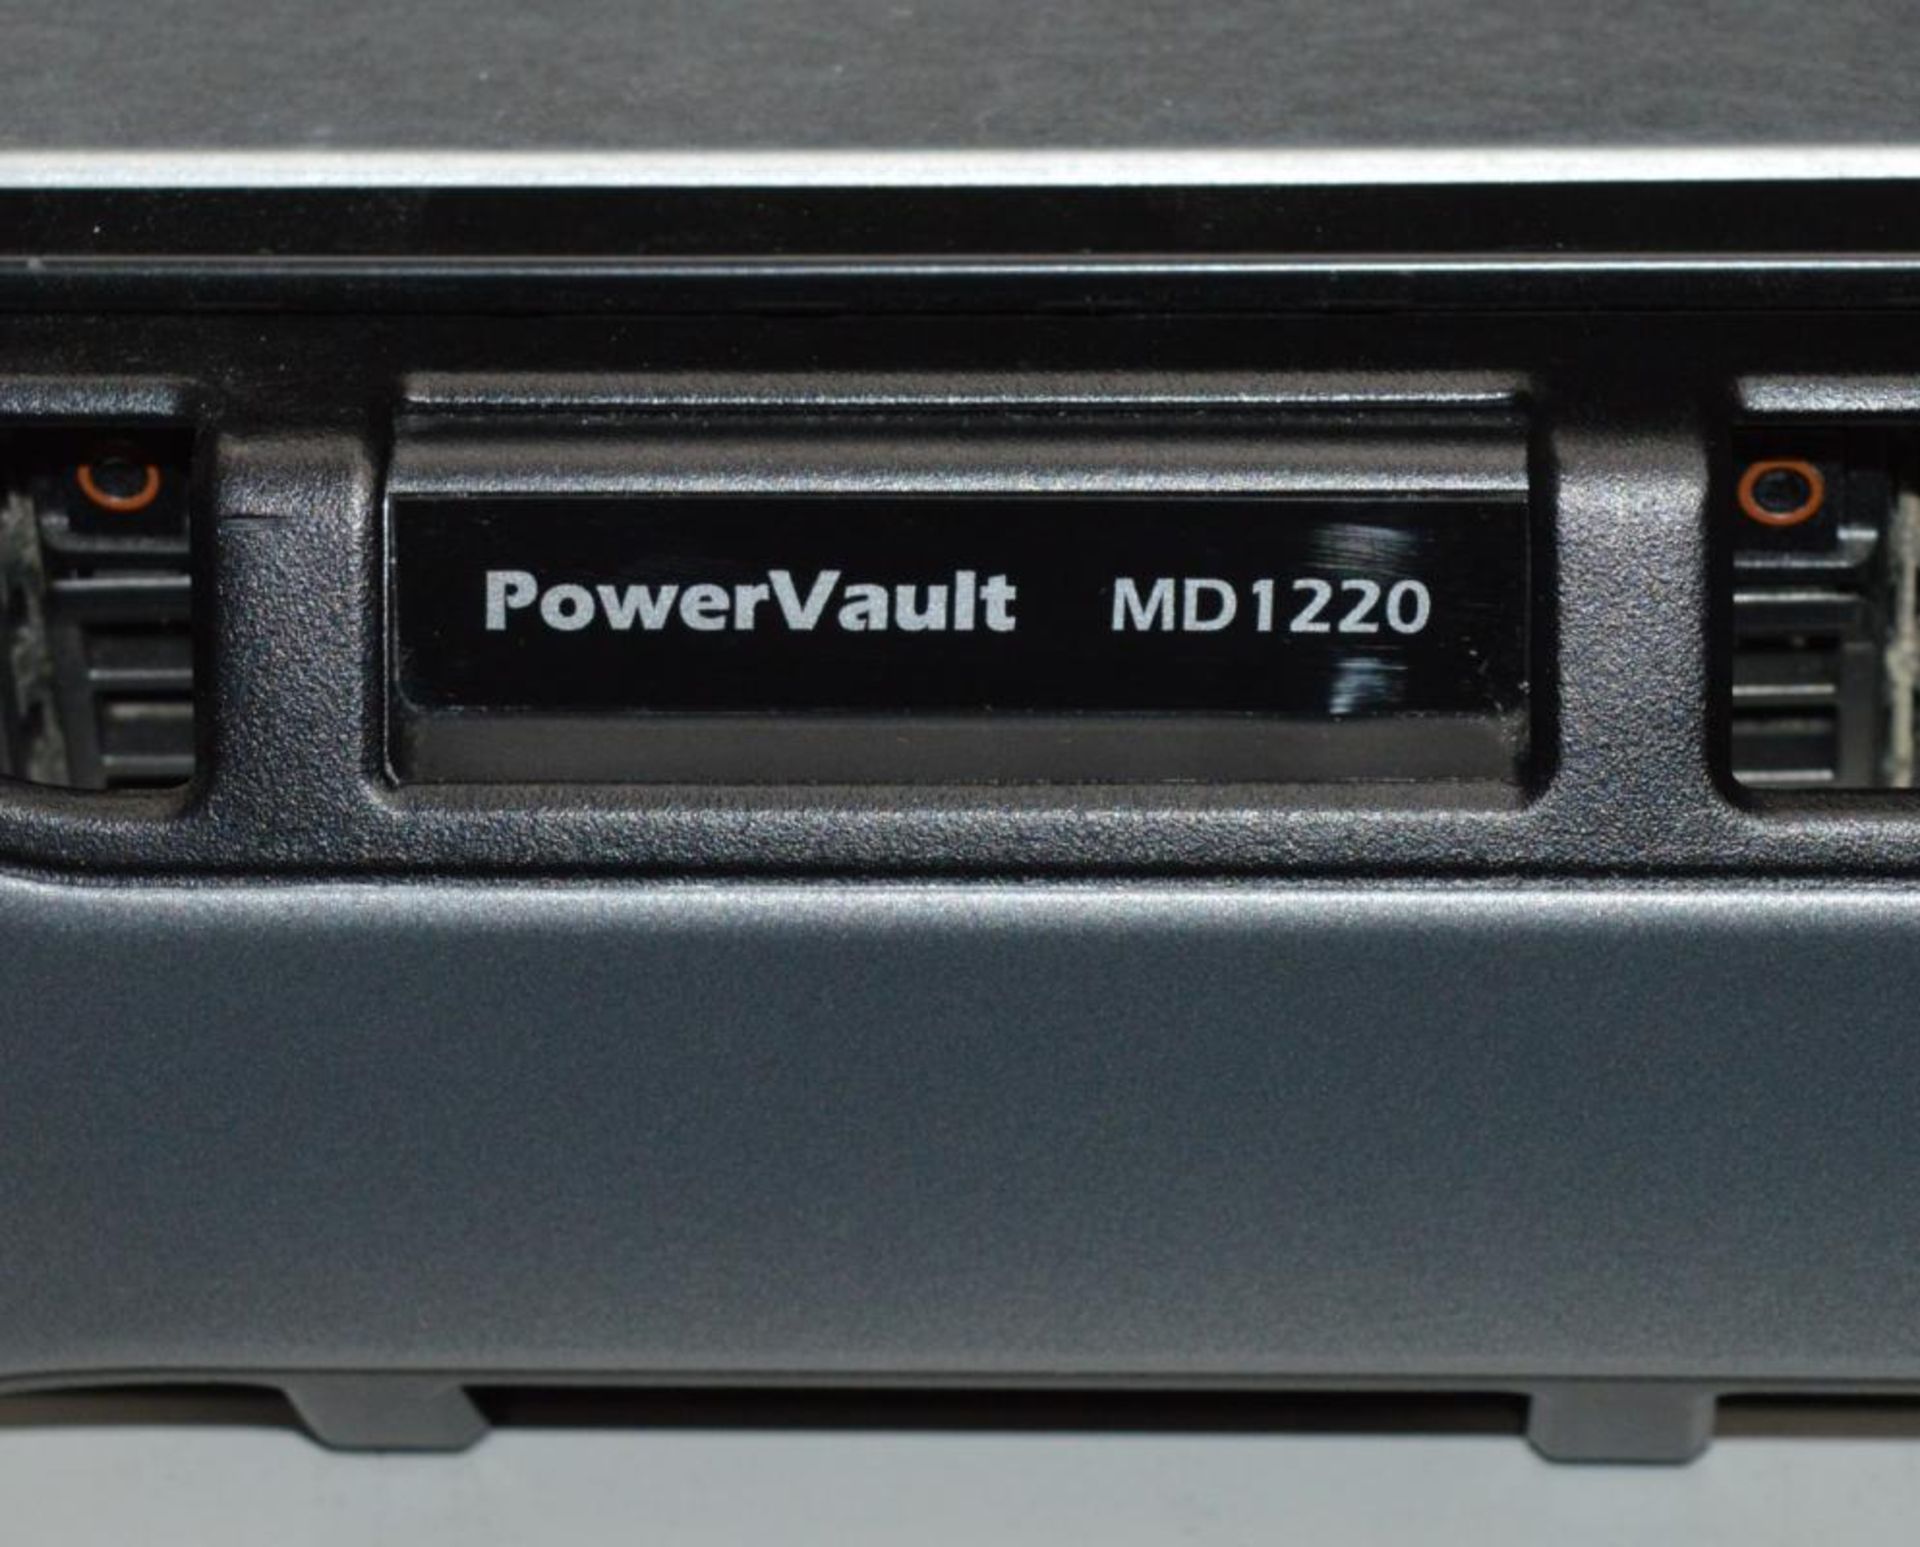 1 x Dell PowerVault MD1220 With Daul 600w PSU's and 2 x MD12 6Gb SAS Controllers - Bild 2 aus 8